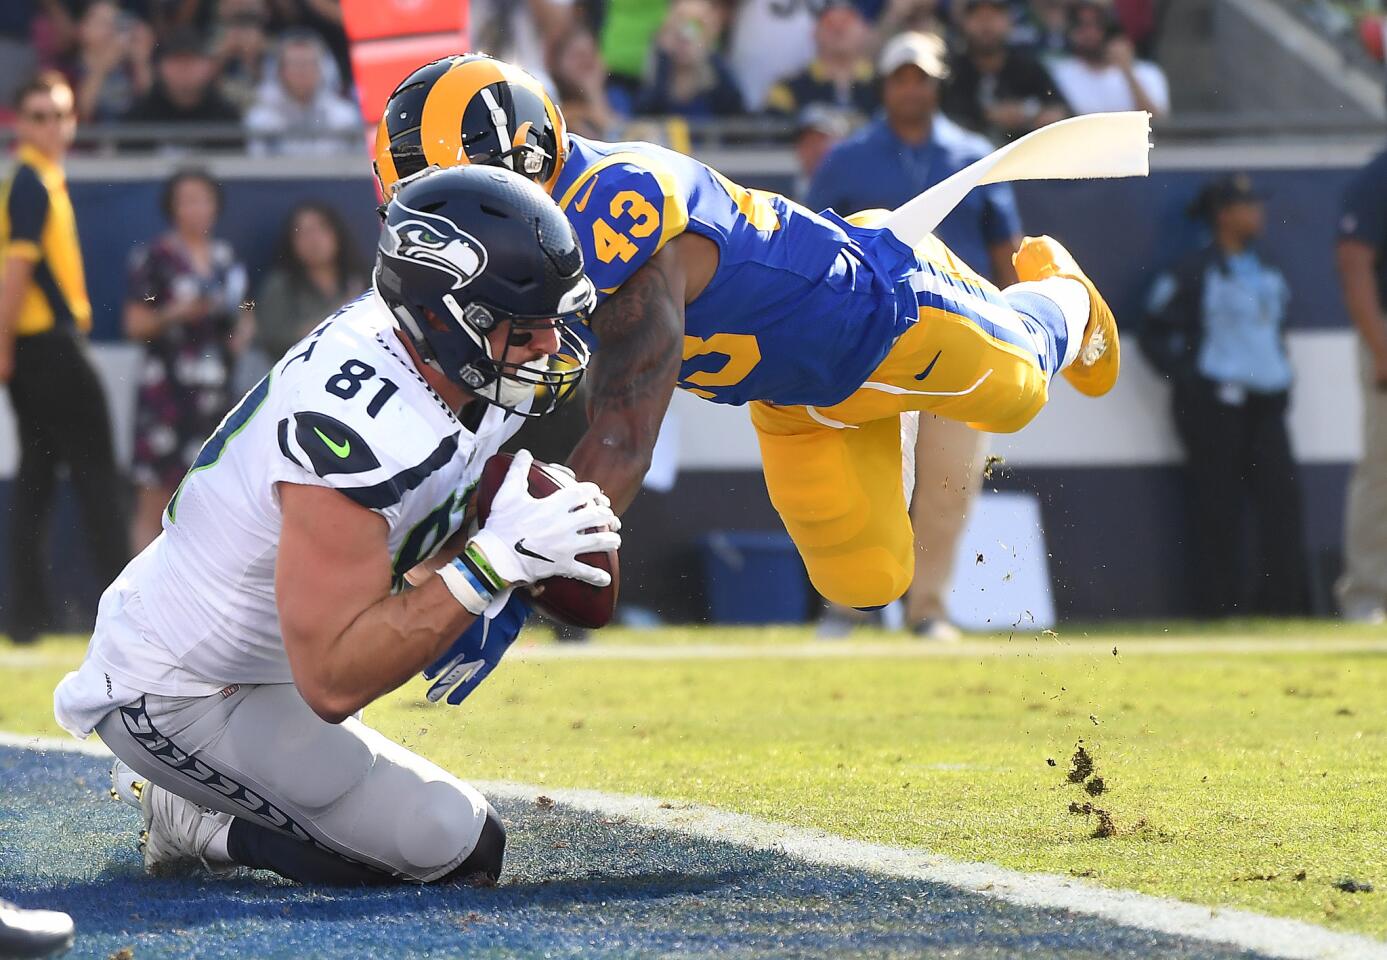 Seattle Seahawks tight end Nick Vannett catches a touchdown pass in front of Rams safety John Johnson in the first quarter at the Coliseum on Sunday.